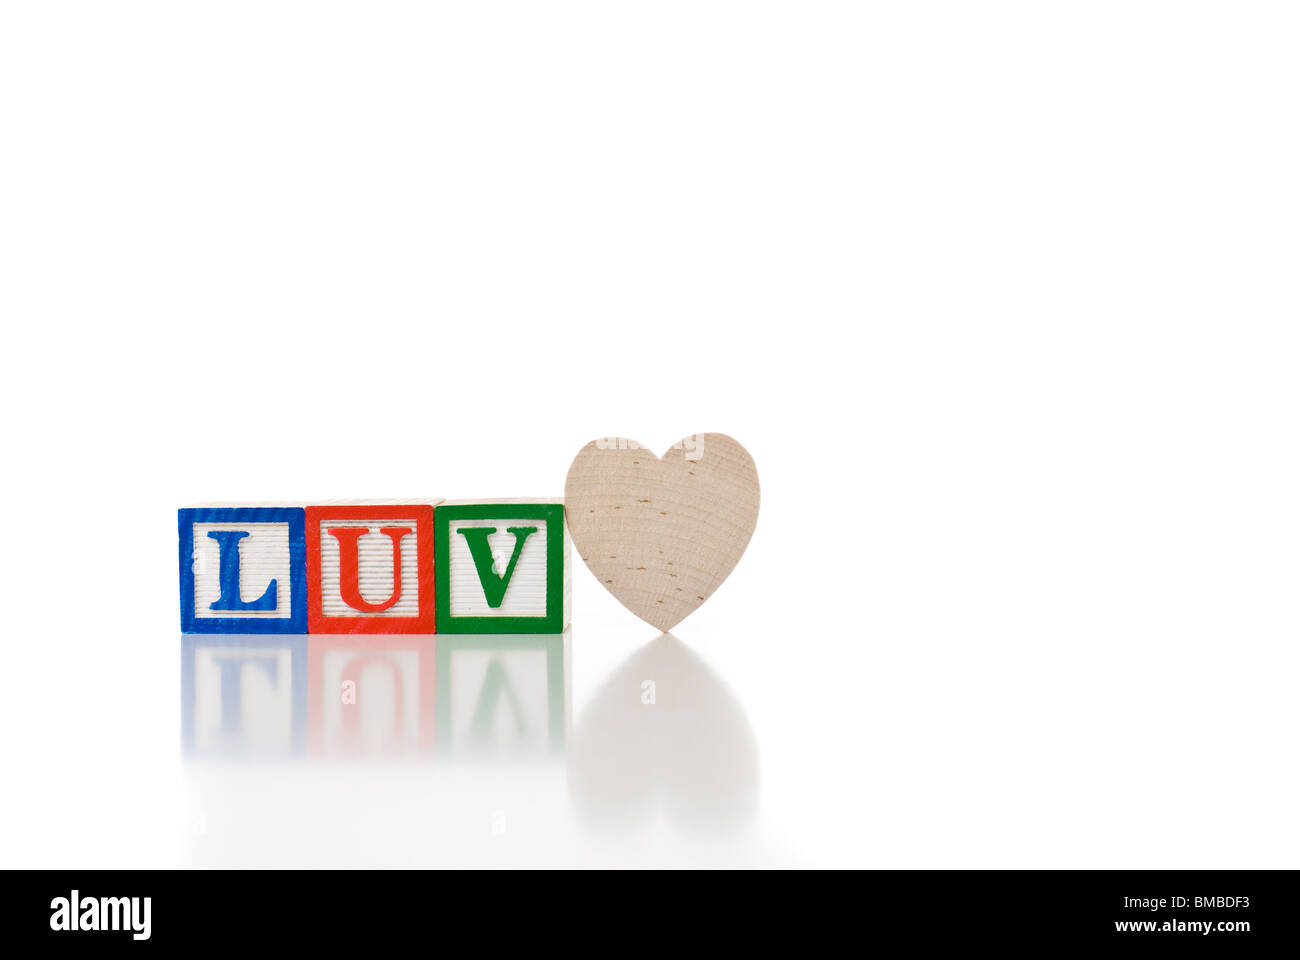 Colorful children's blocks spelling LUV with a heart Stock Photo